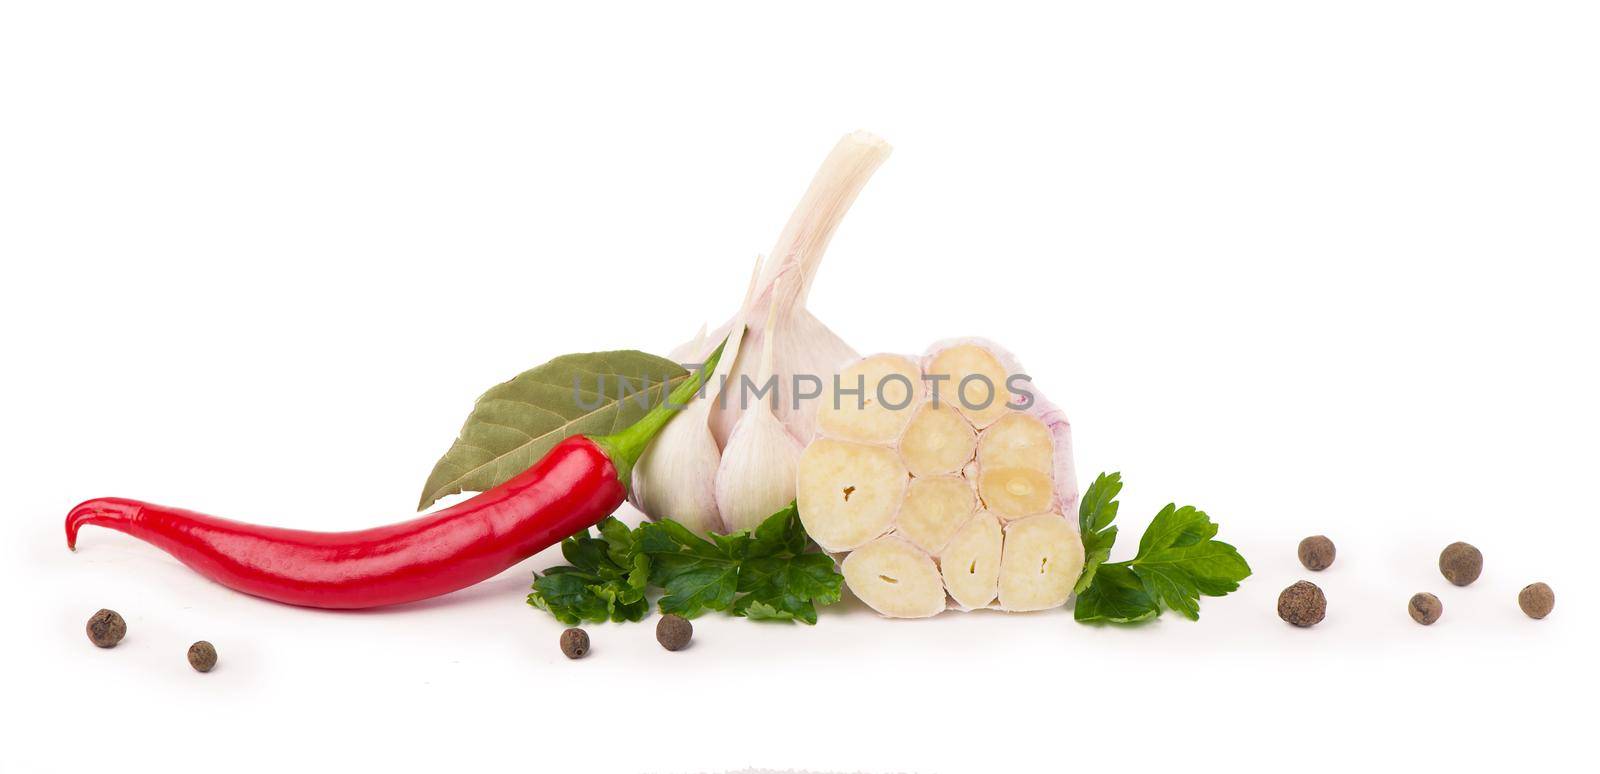 young garlic with cilantro and black peppercorns on a white background. Copy space. Close up. by aprilphoto